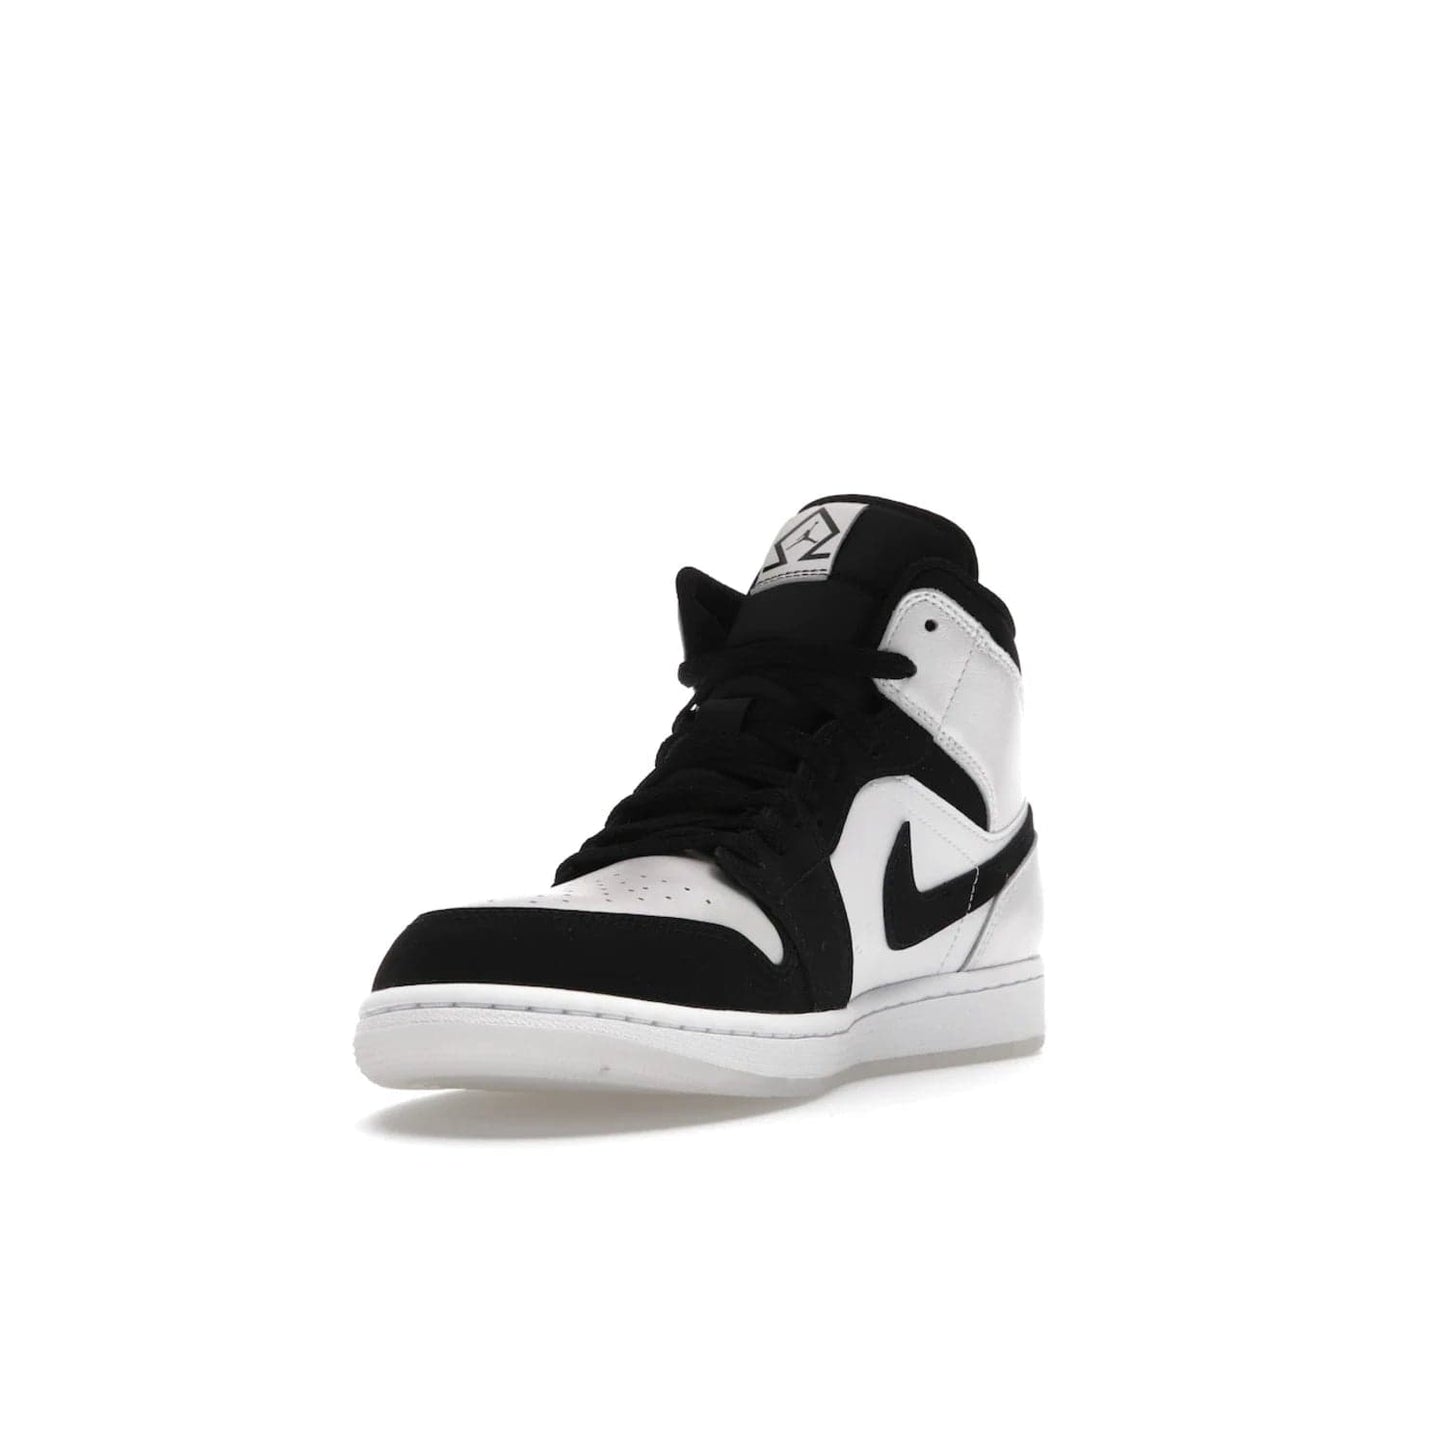 Jordan 1 Mid Diamond Shorts - Image 13 - Only at www.BallersClubKickz.com - Classic style for any occasion. Air Jordan 1 Mid Diamond shorts with white leather upper, black Durabuck overlays, Wings logo, Jumpman woven label and semi-translucent outsoles.